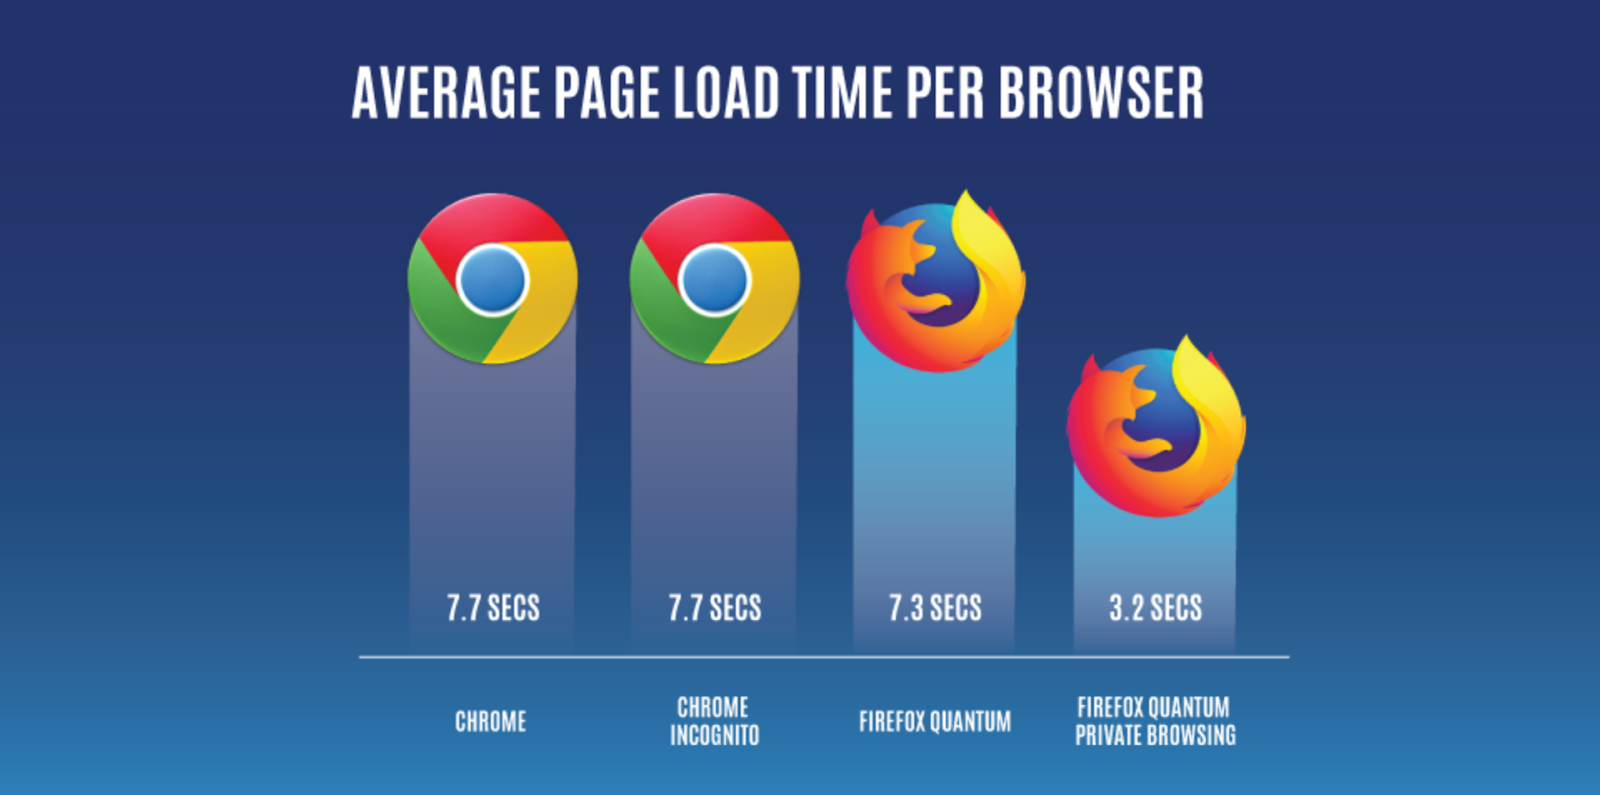 Is Chrome really faster than Firefox?